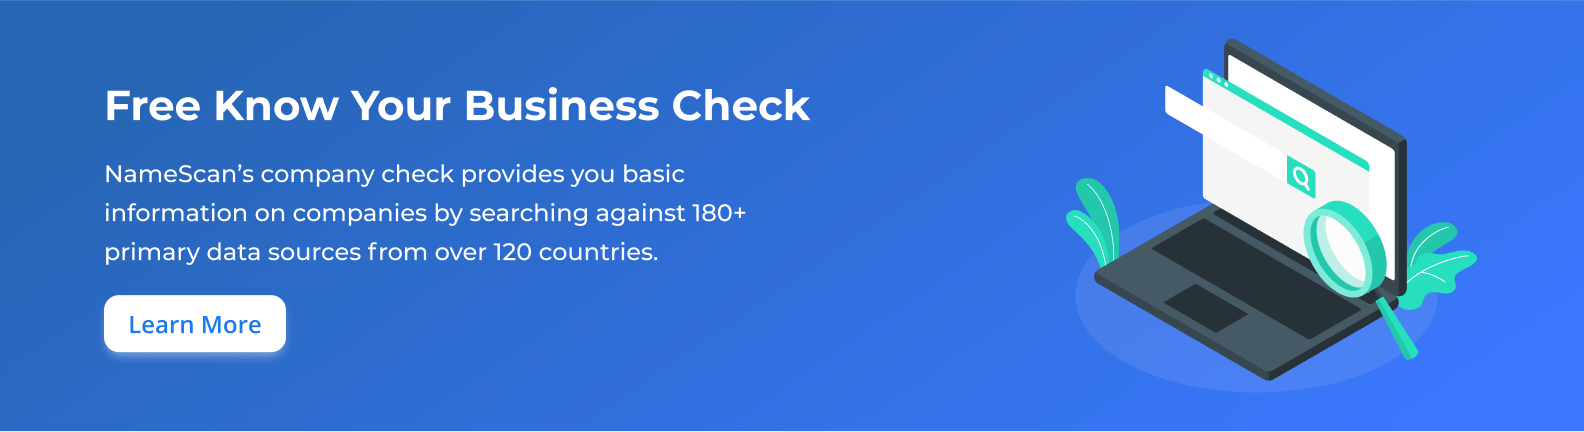 Free Know Your Business Check